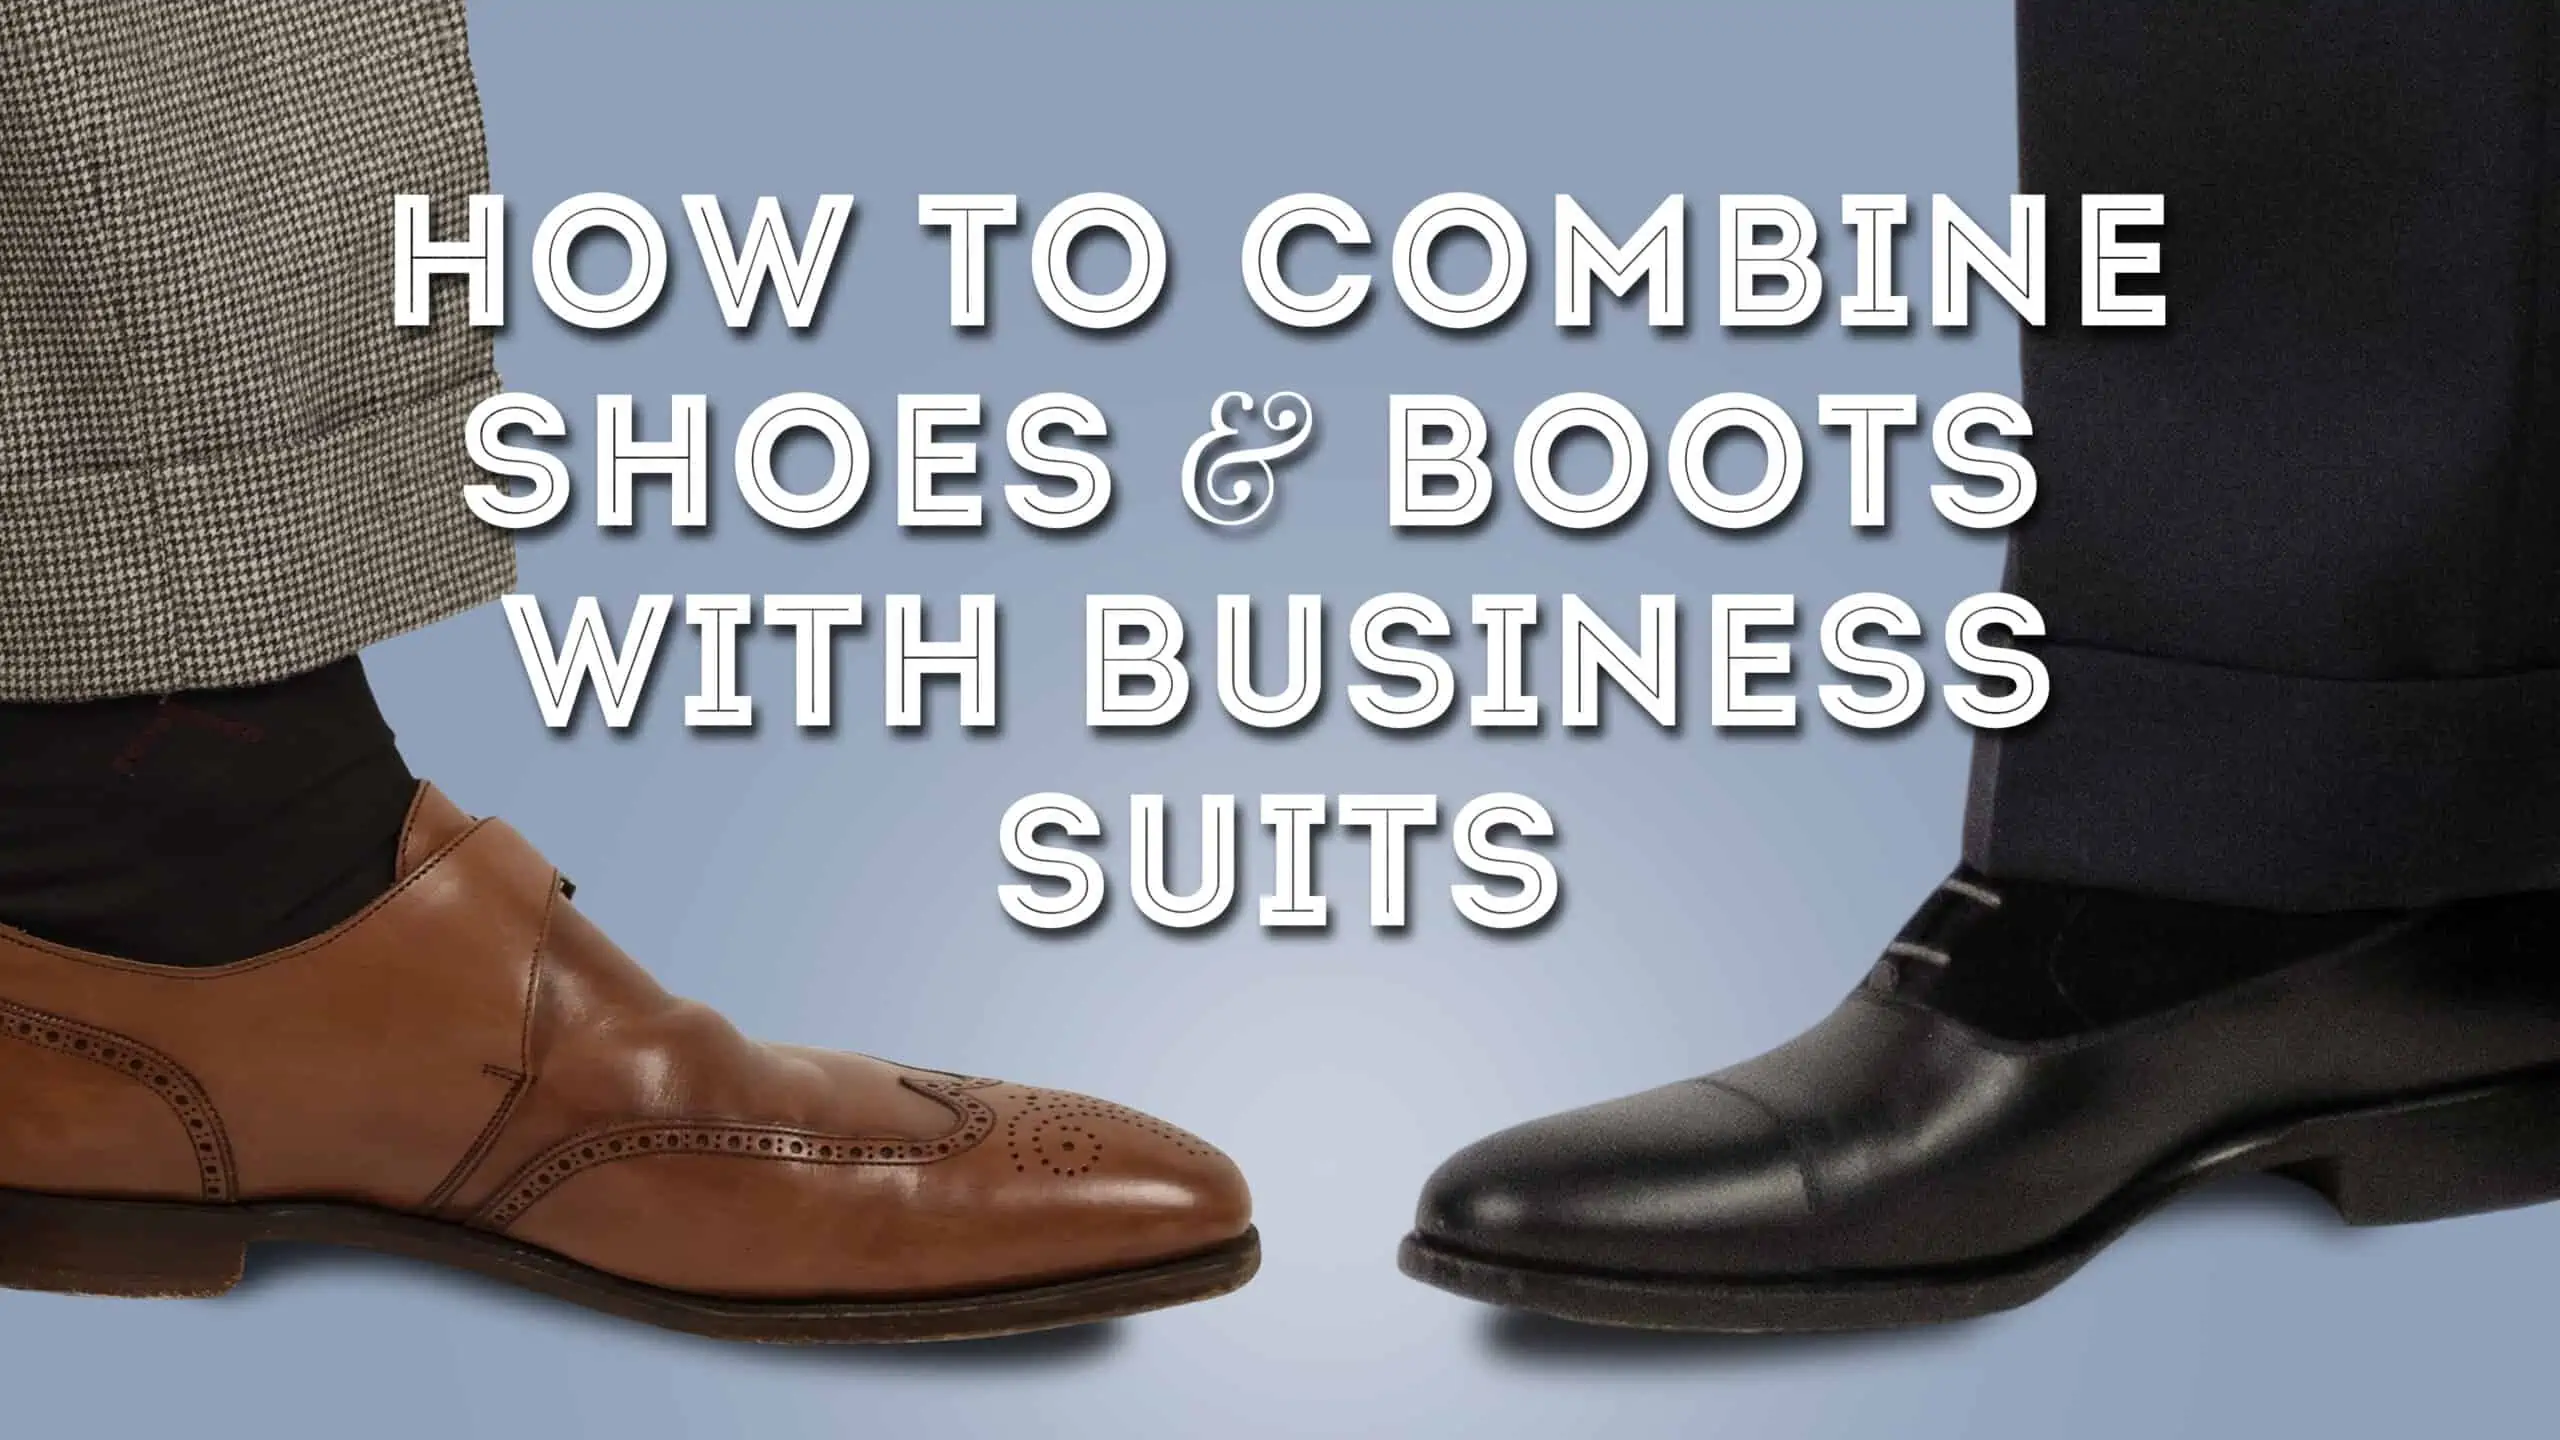 How To Combine Shoes & Boots With Business Suits - Gentlemen's Outfit Ideas